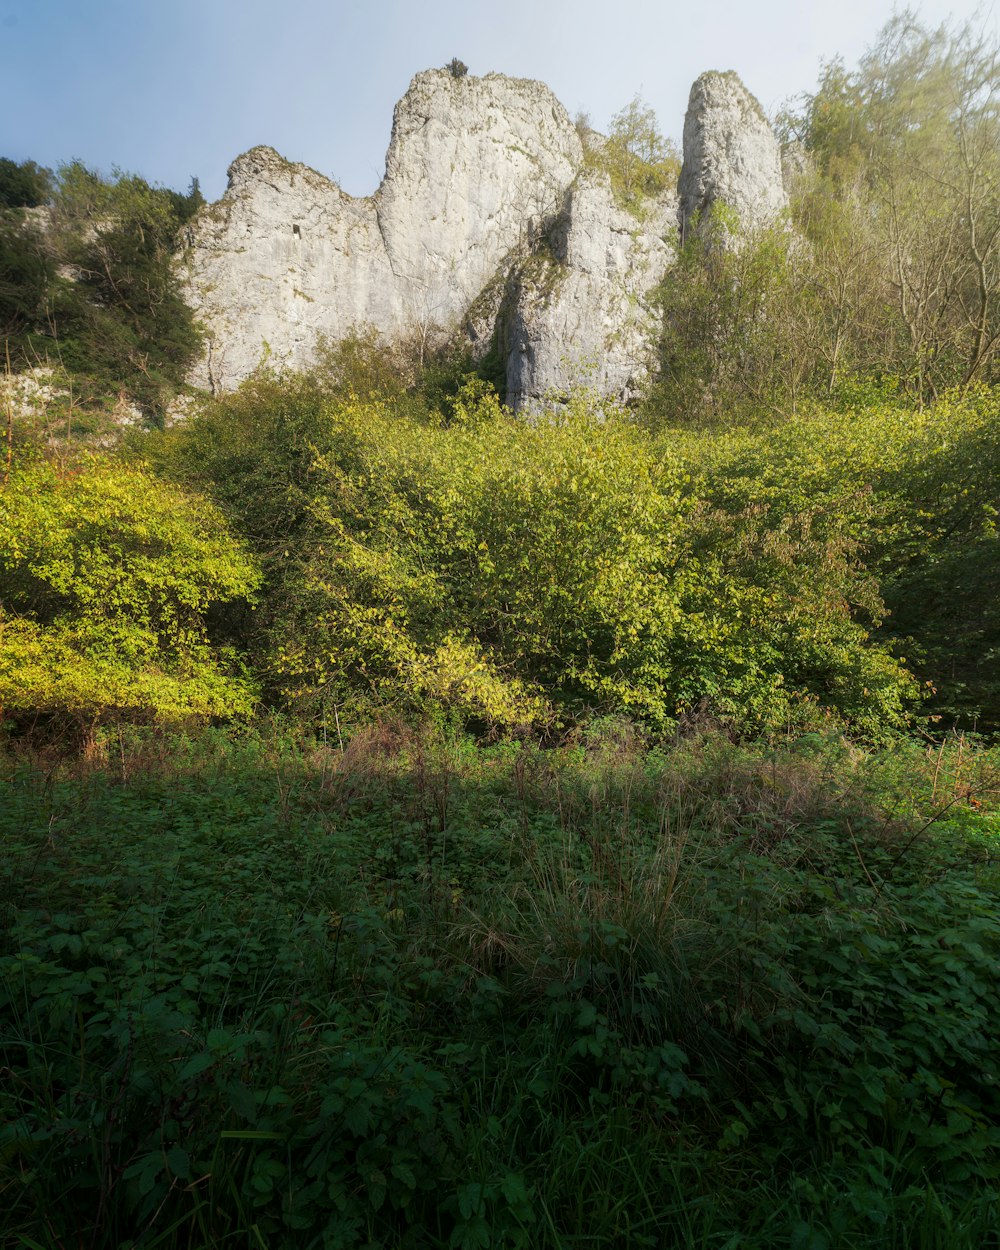 a lush green field next to a large rock formation